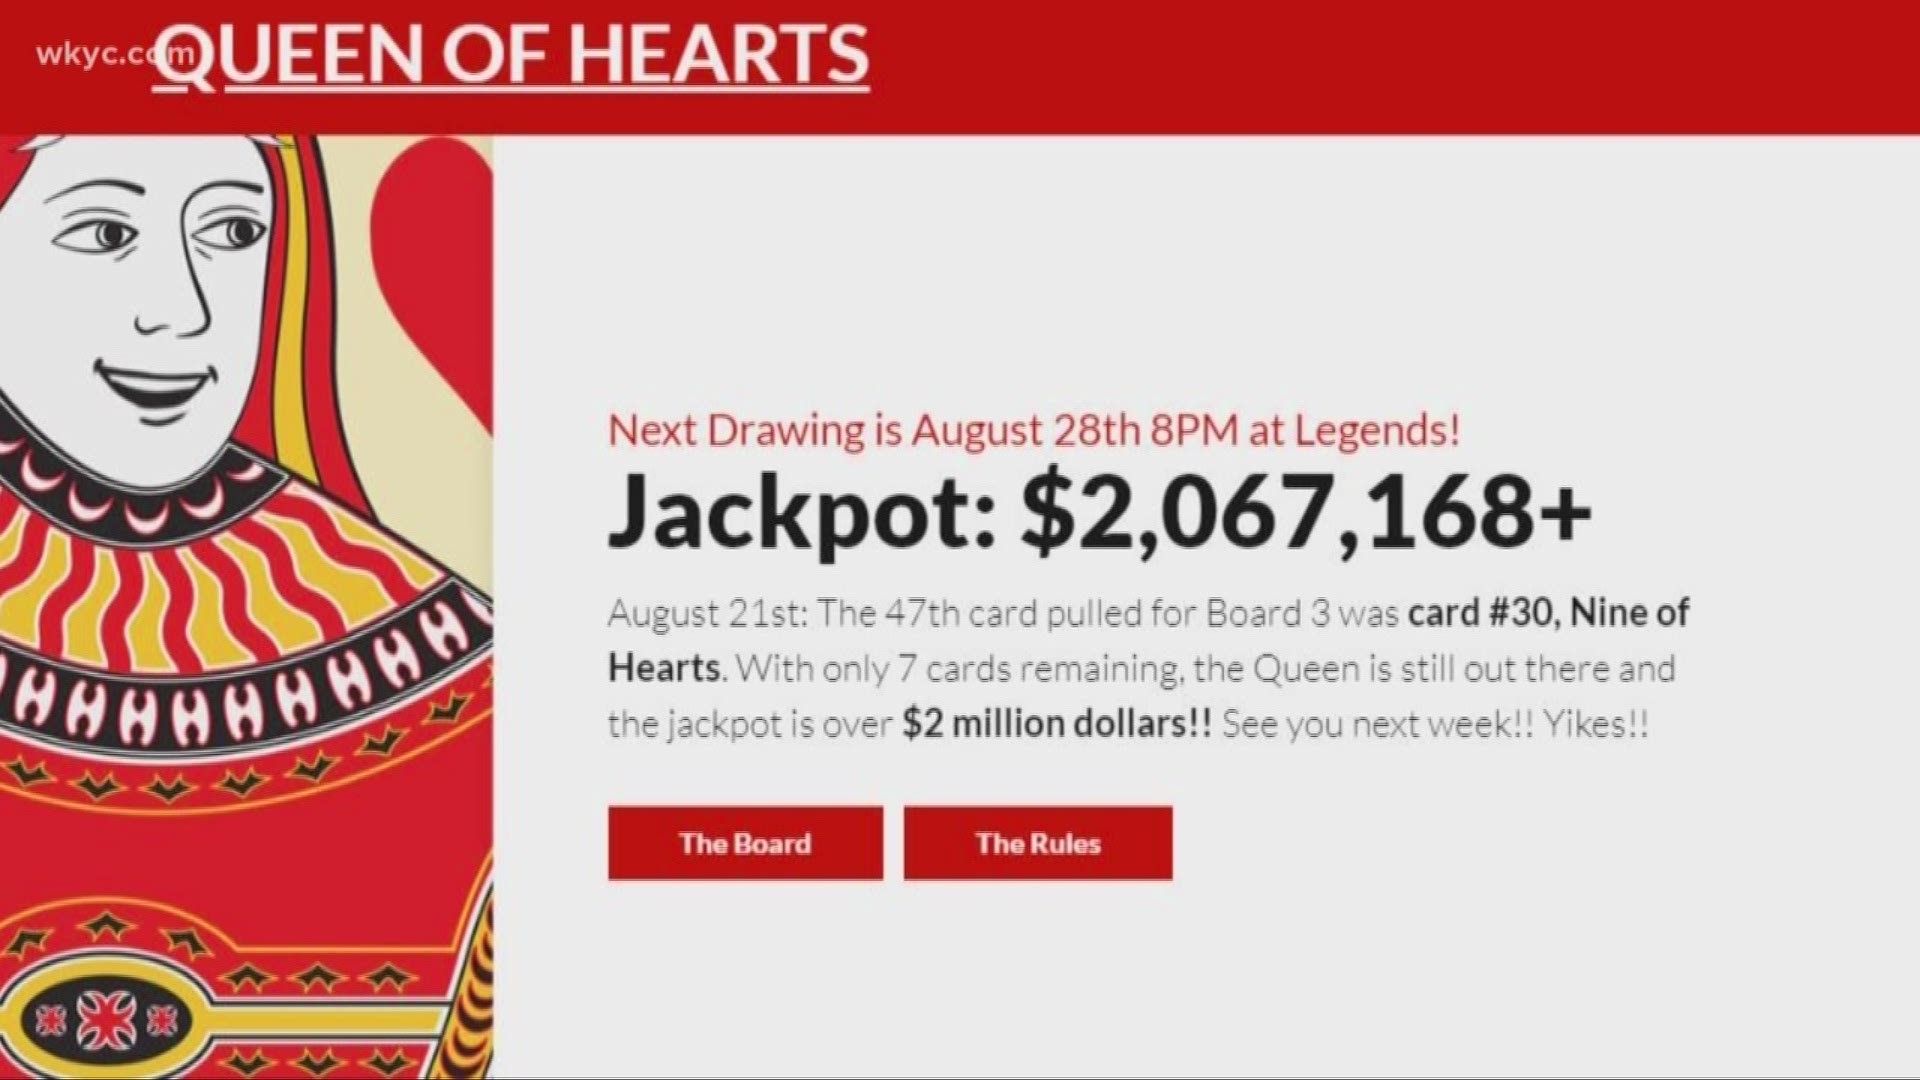 Aug. 28, 2019: Will the winner be crowned this week? The jackpot has climbed to $2,067,168+ for Wednesday's 8 p.m. drawing in the Grayton Road Tavern's popular Queen of Hearts game.